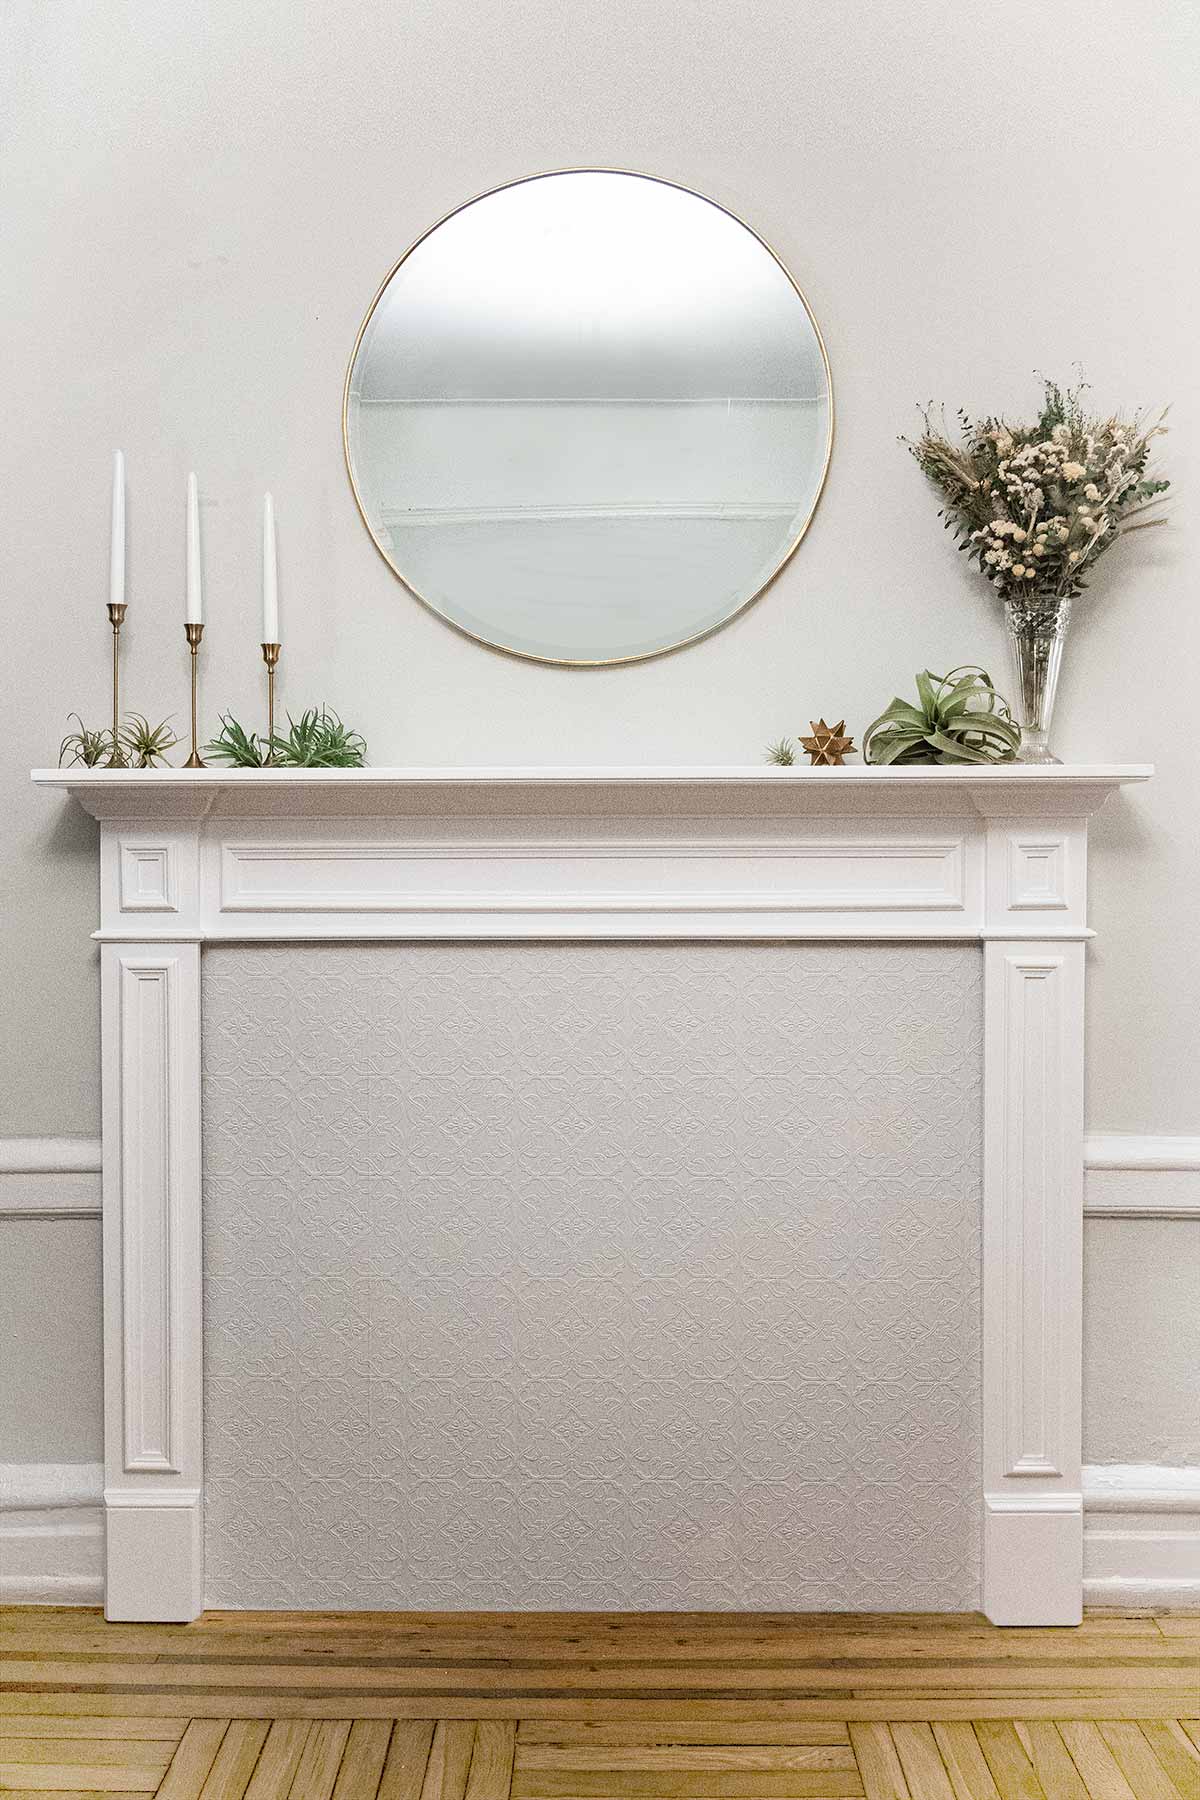 A mantle on a wall with a round mirror, candles and flowers.